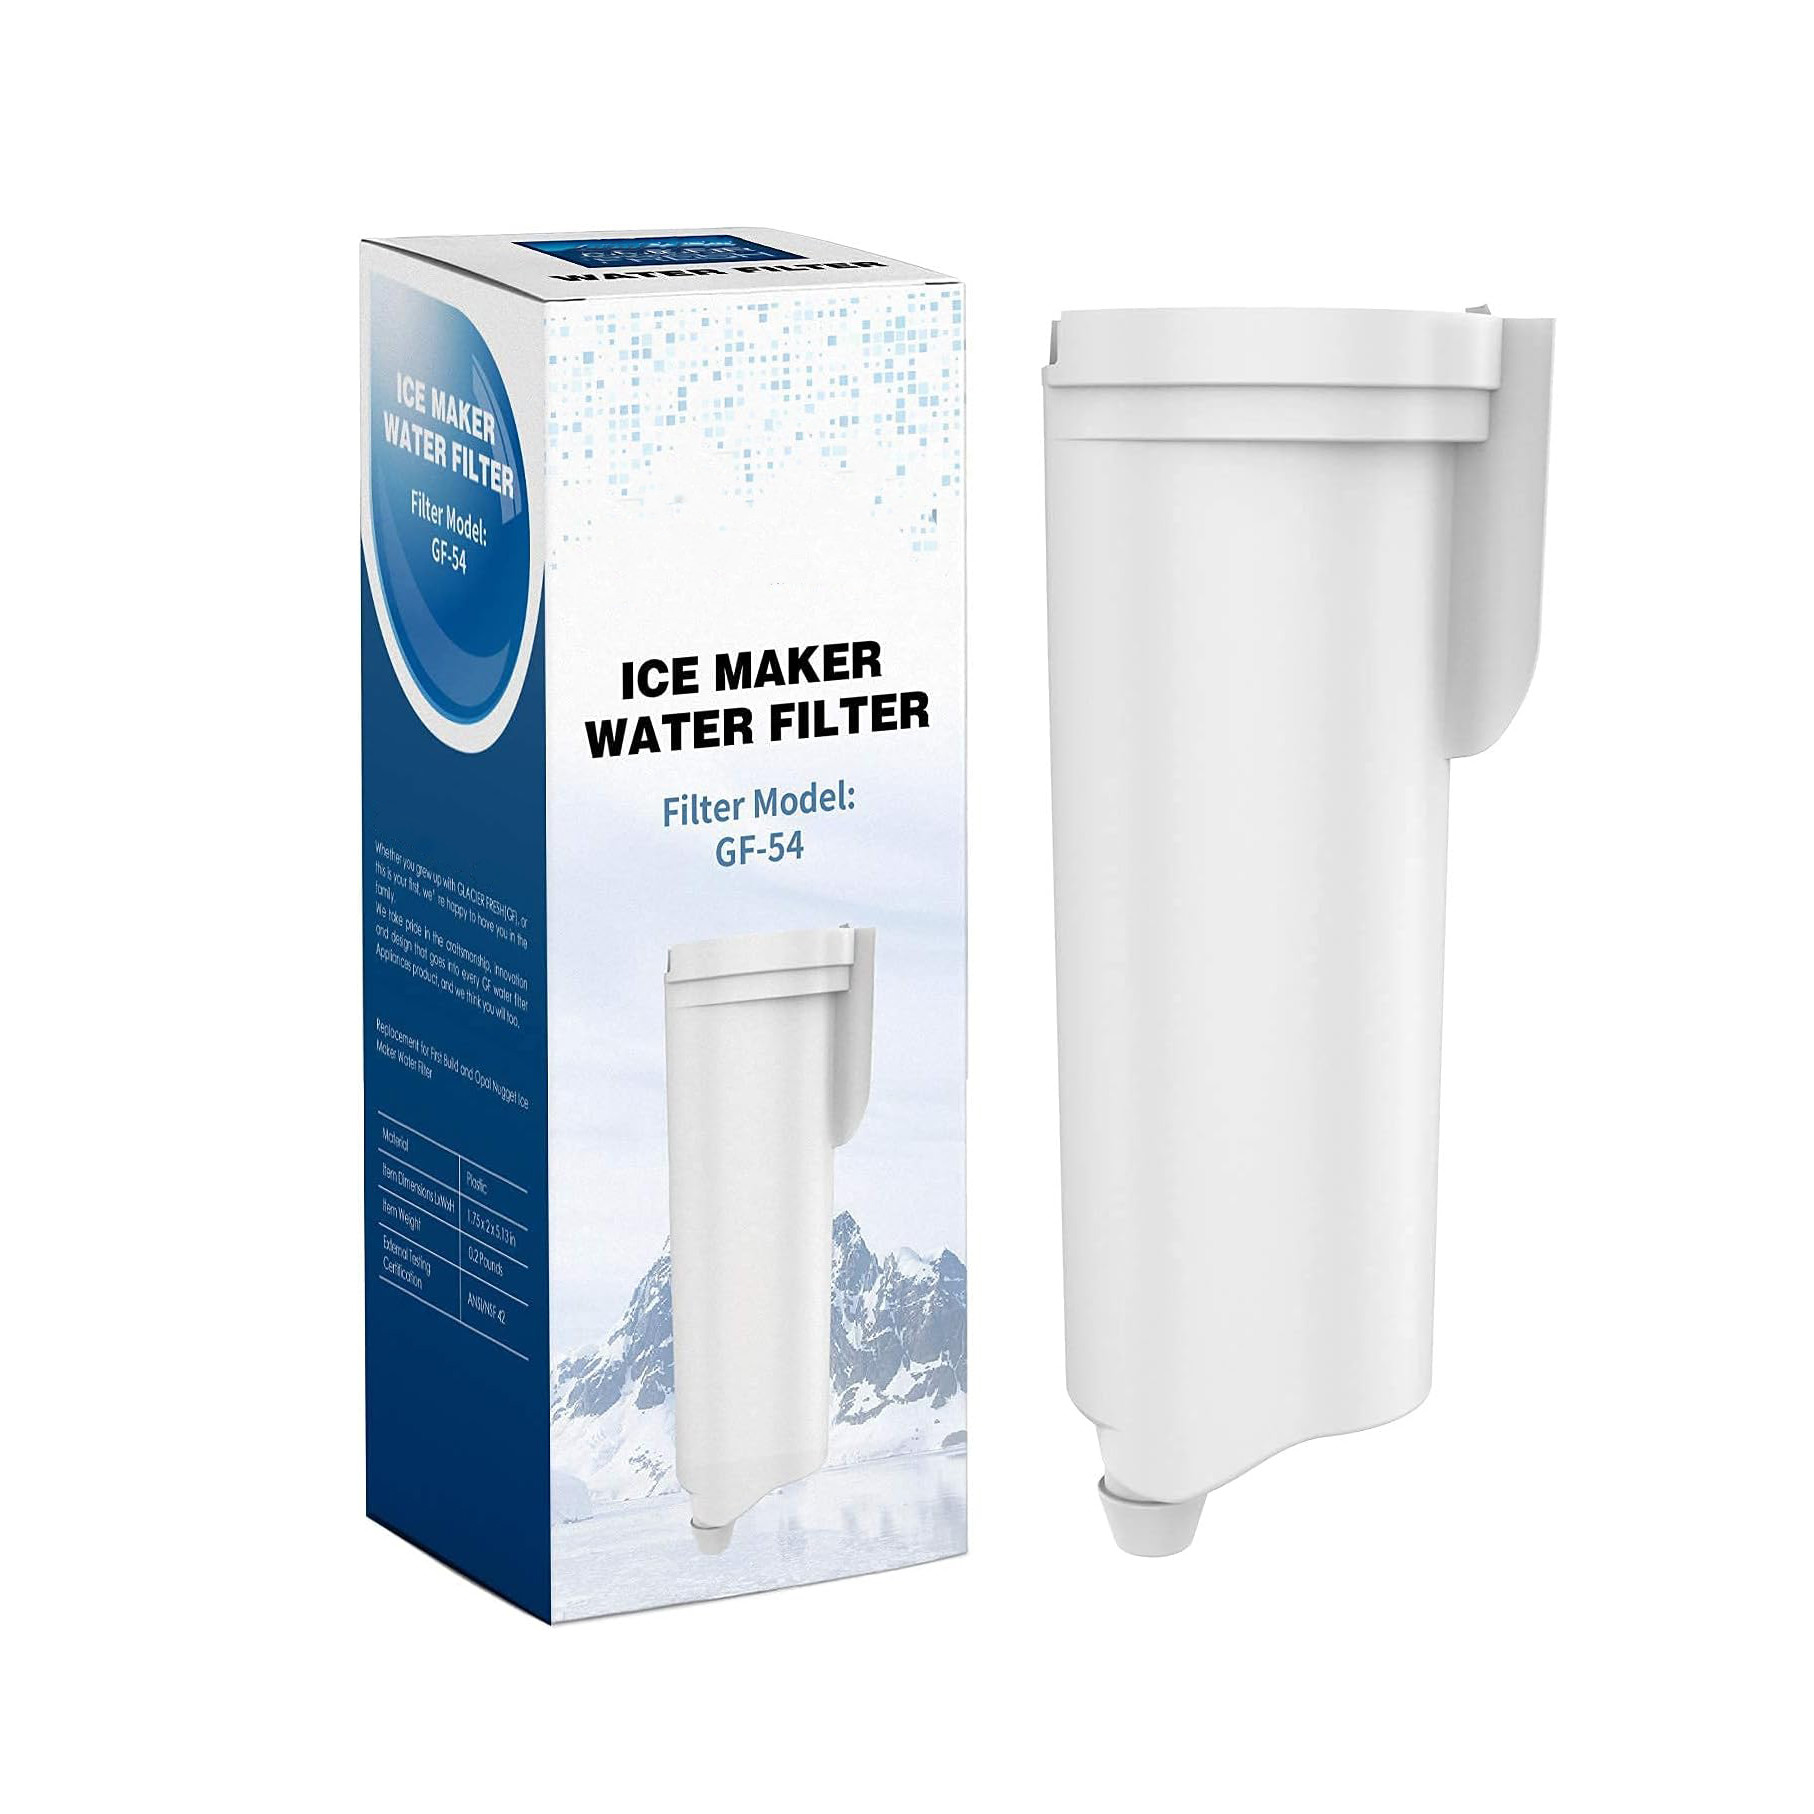 China G/E Profile Opal Ice Maker Water Filter NSF Certified Replace Every 3 Months for Maximum factory